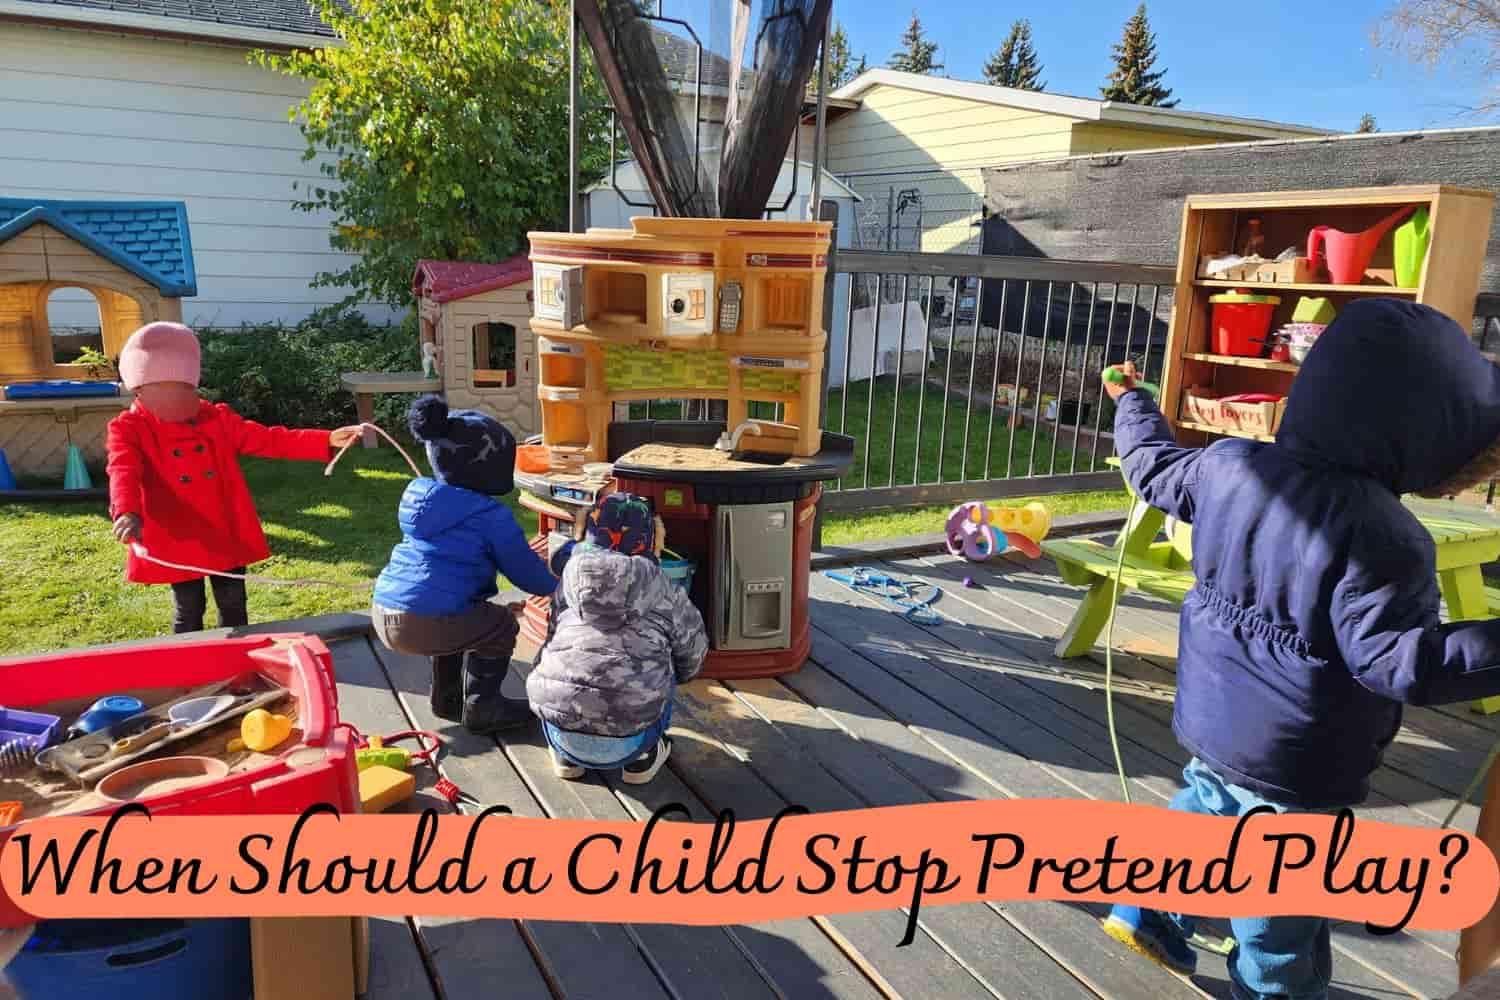 When Should a Child Stop Pretend Play?